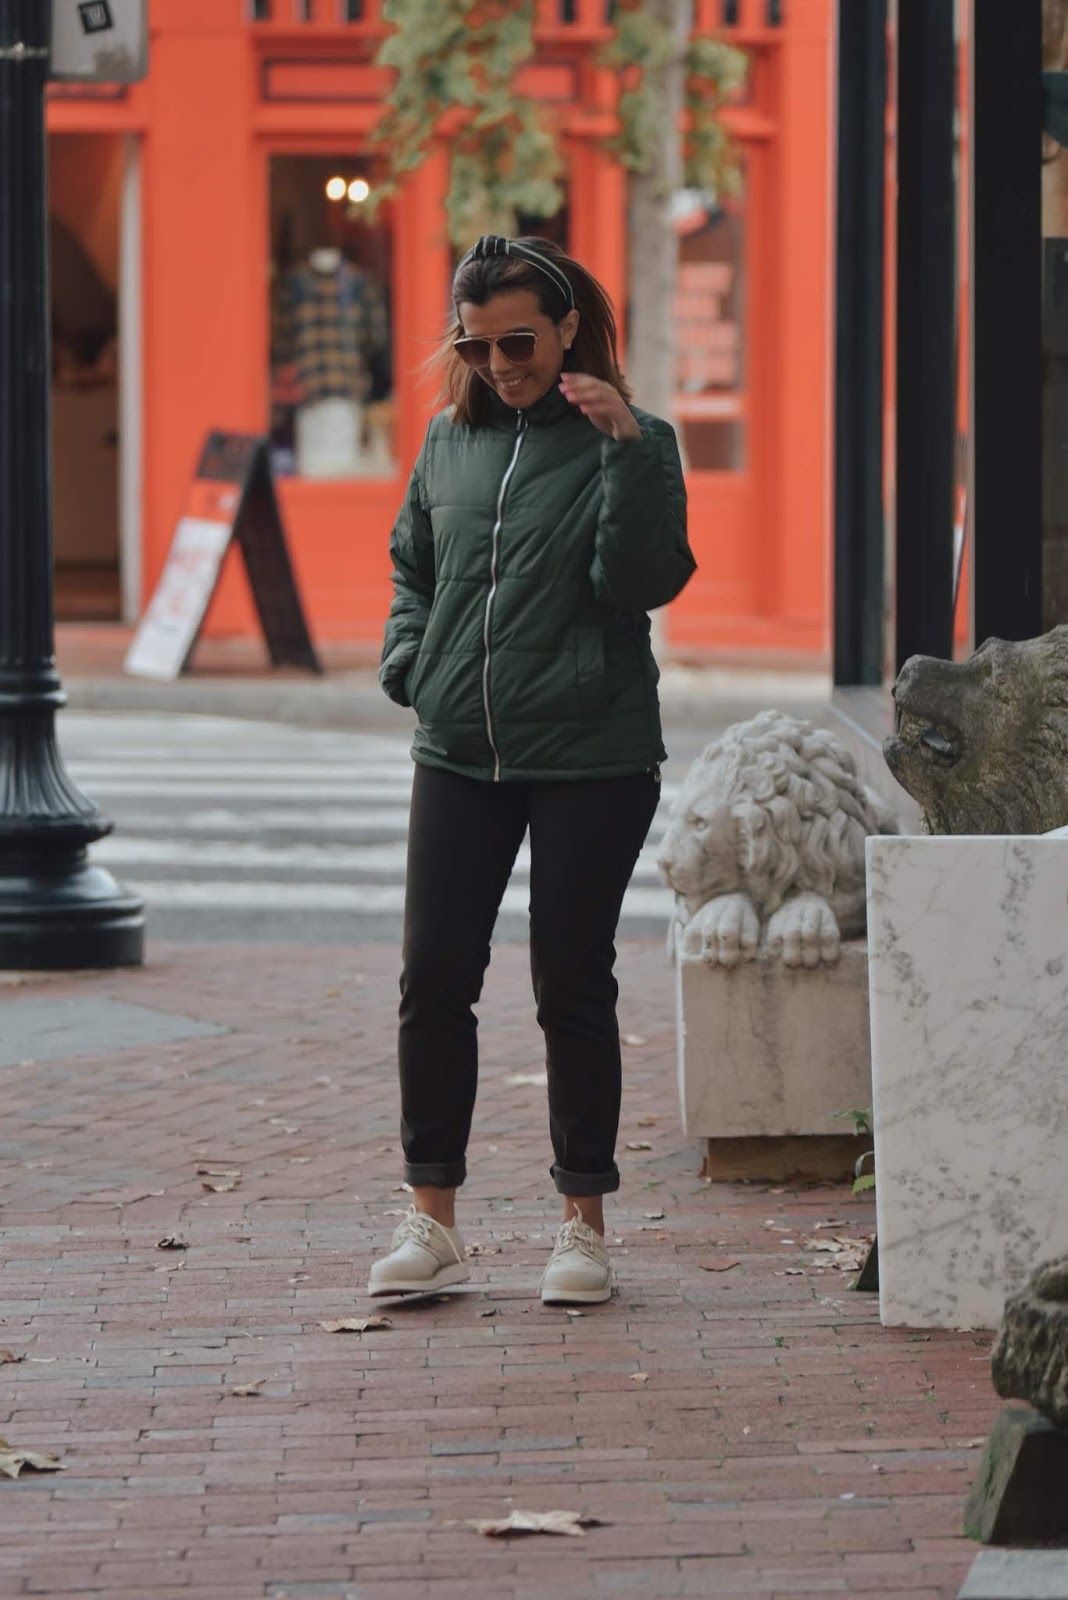 Army Green Quilted Zip-Up Puffer Parka Jacket-mariestilo-lookoftheday-dcblogger-streetstyle-fashionblogger-lookbook store-lbsdaily-moda-